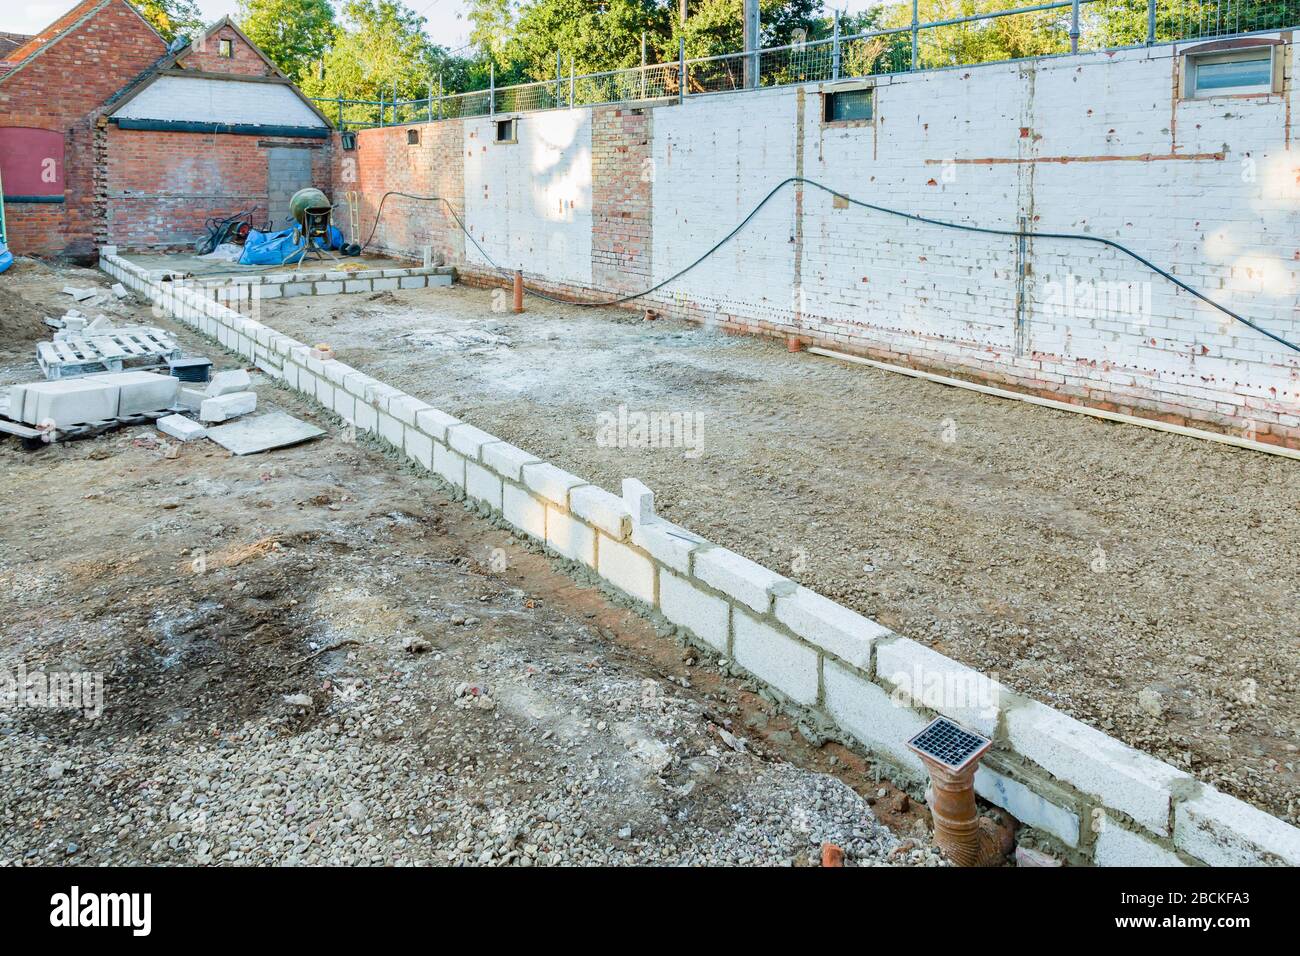 Breeze blocks and foundations on a building site, rebuilding and conversion of outbuildings in a UK period house Stock Photo